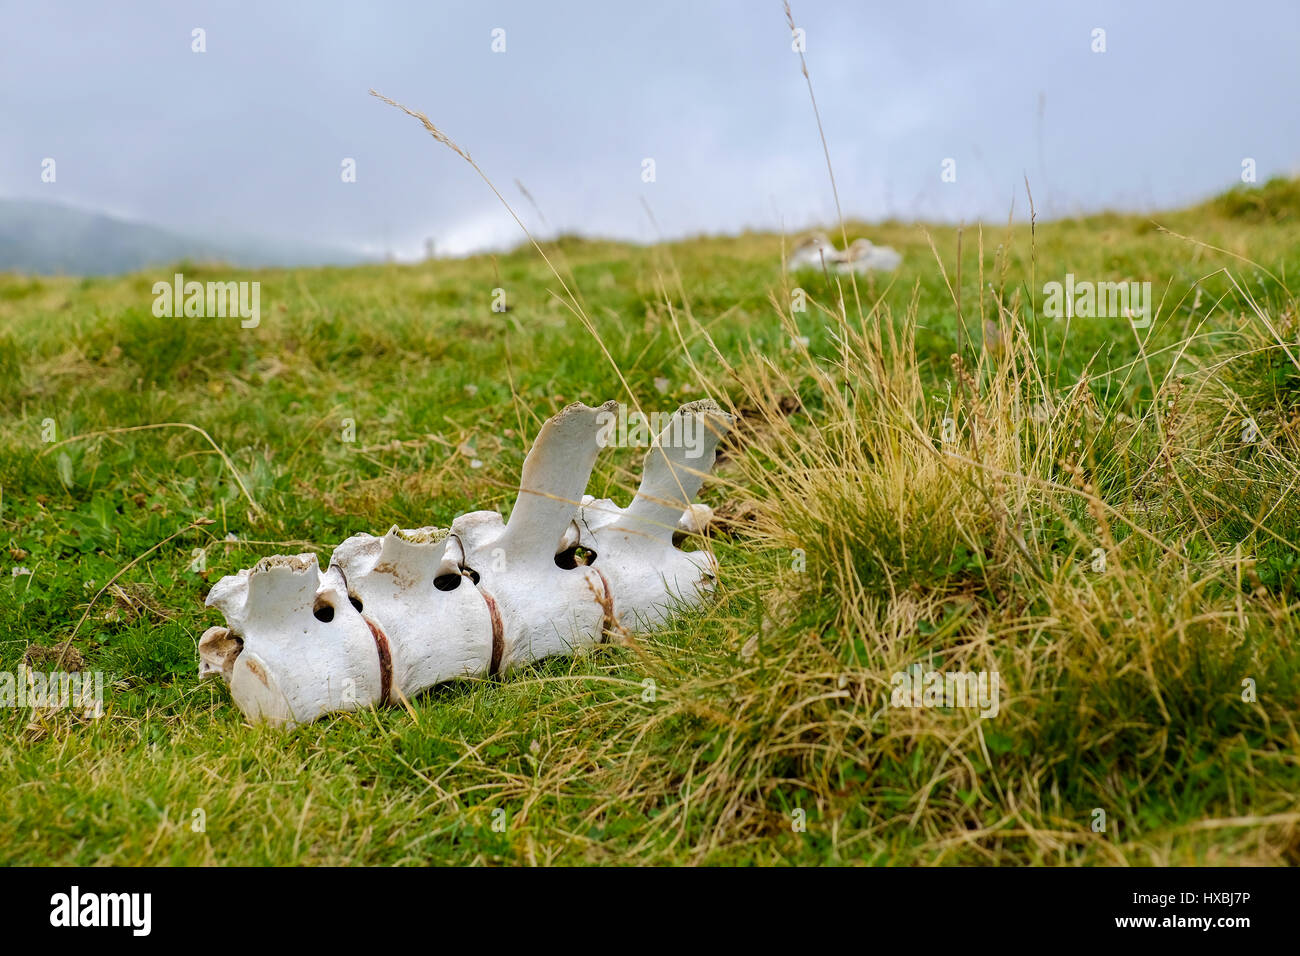 bone fragments of a spinal column lying in the grass Stock Photo